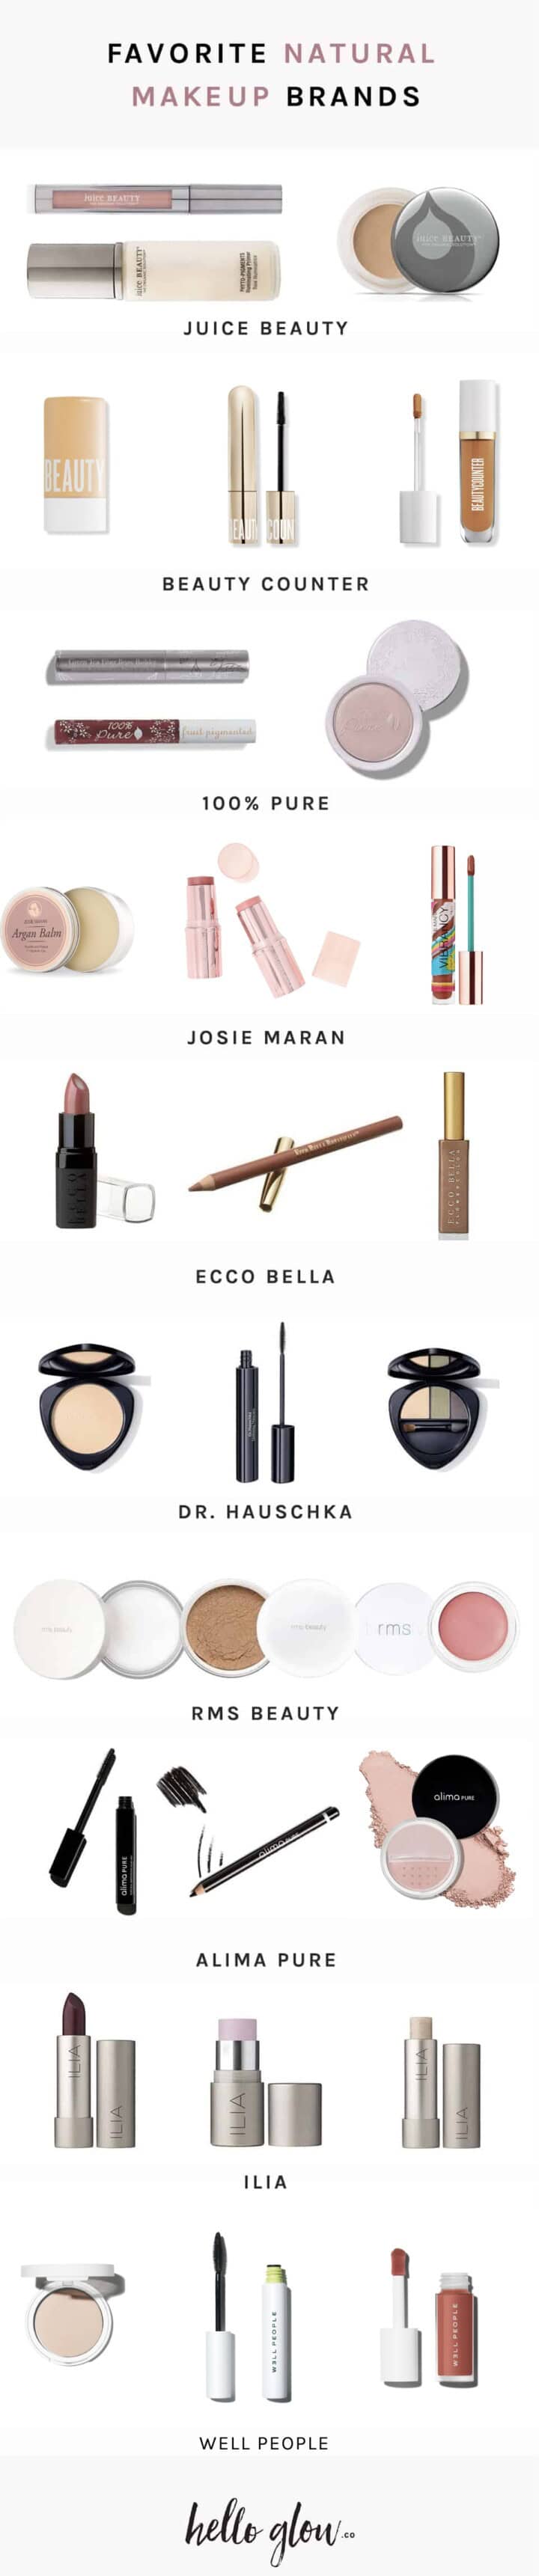 10 natural makeup brands you need to try